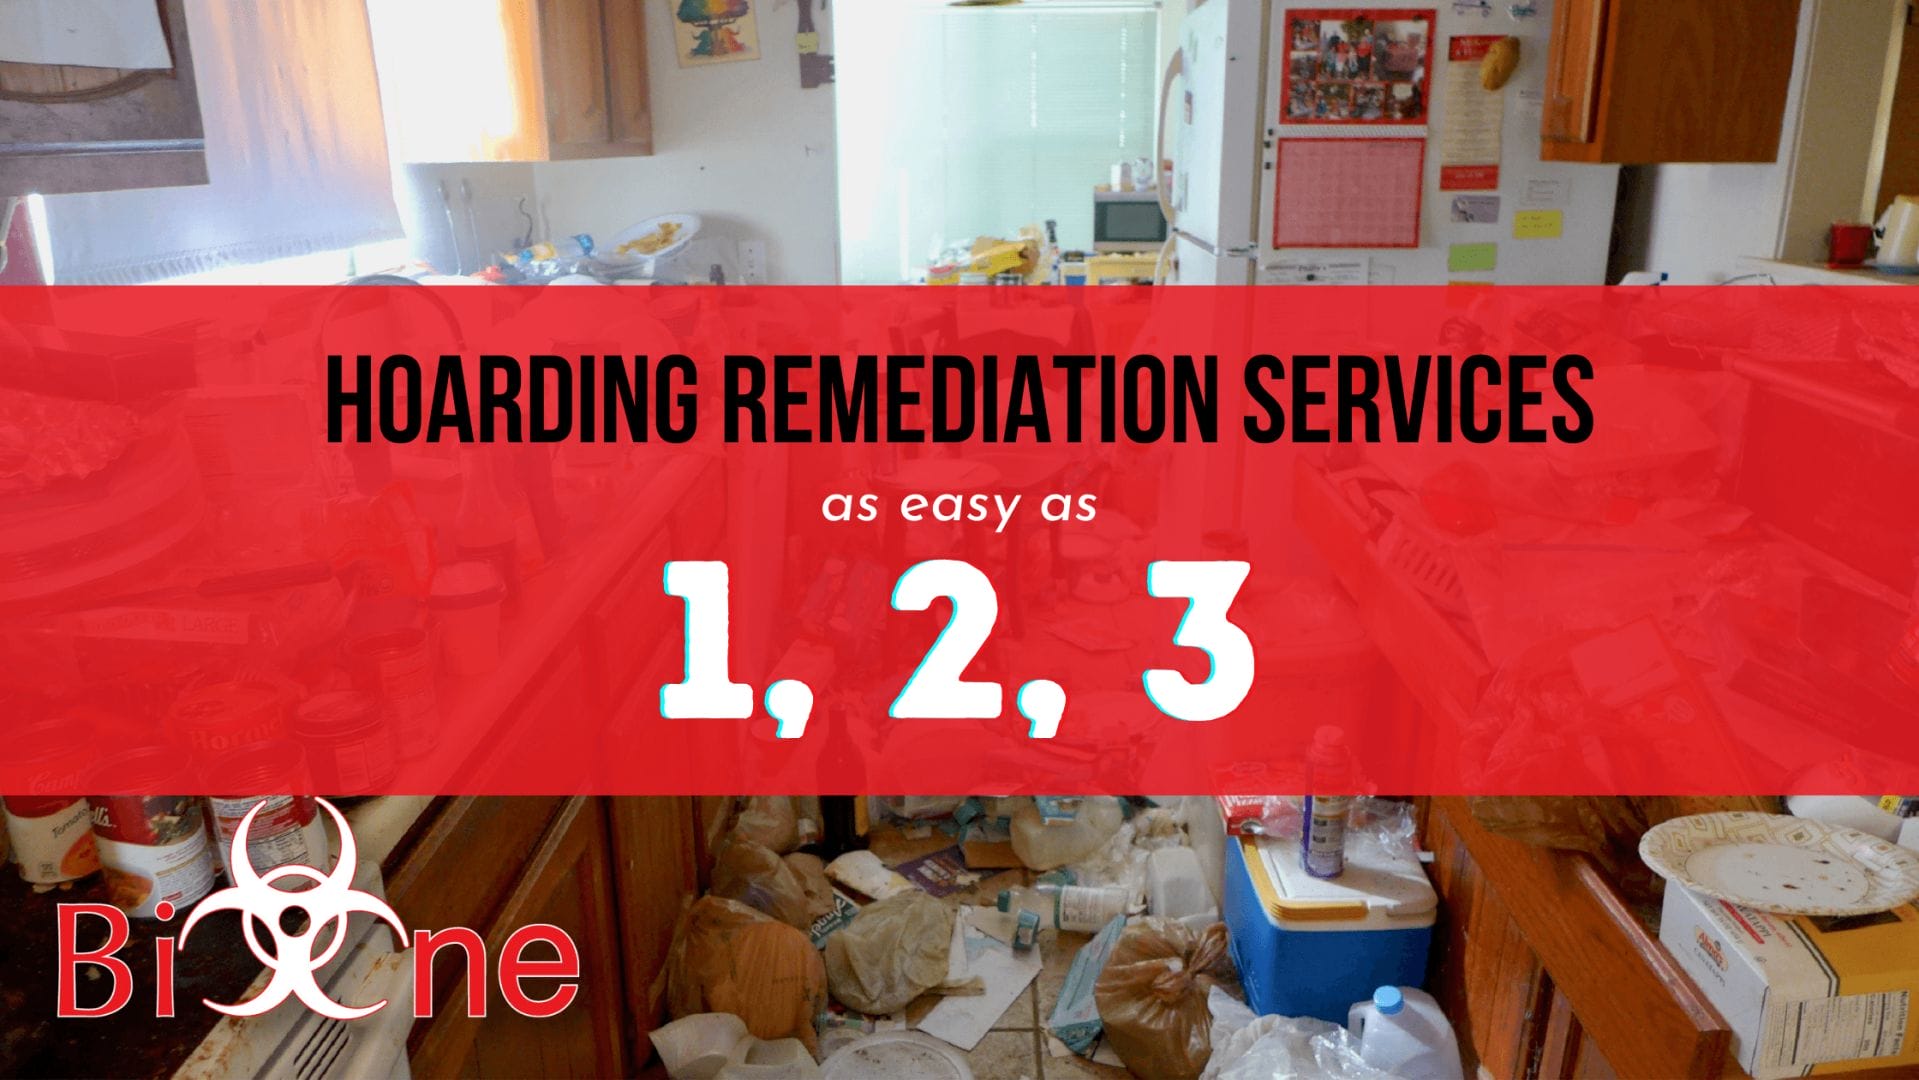 Hoarding Remediation Services Blog Post